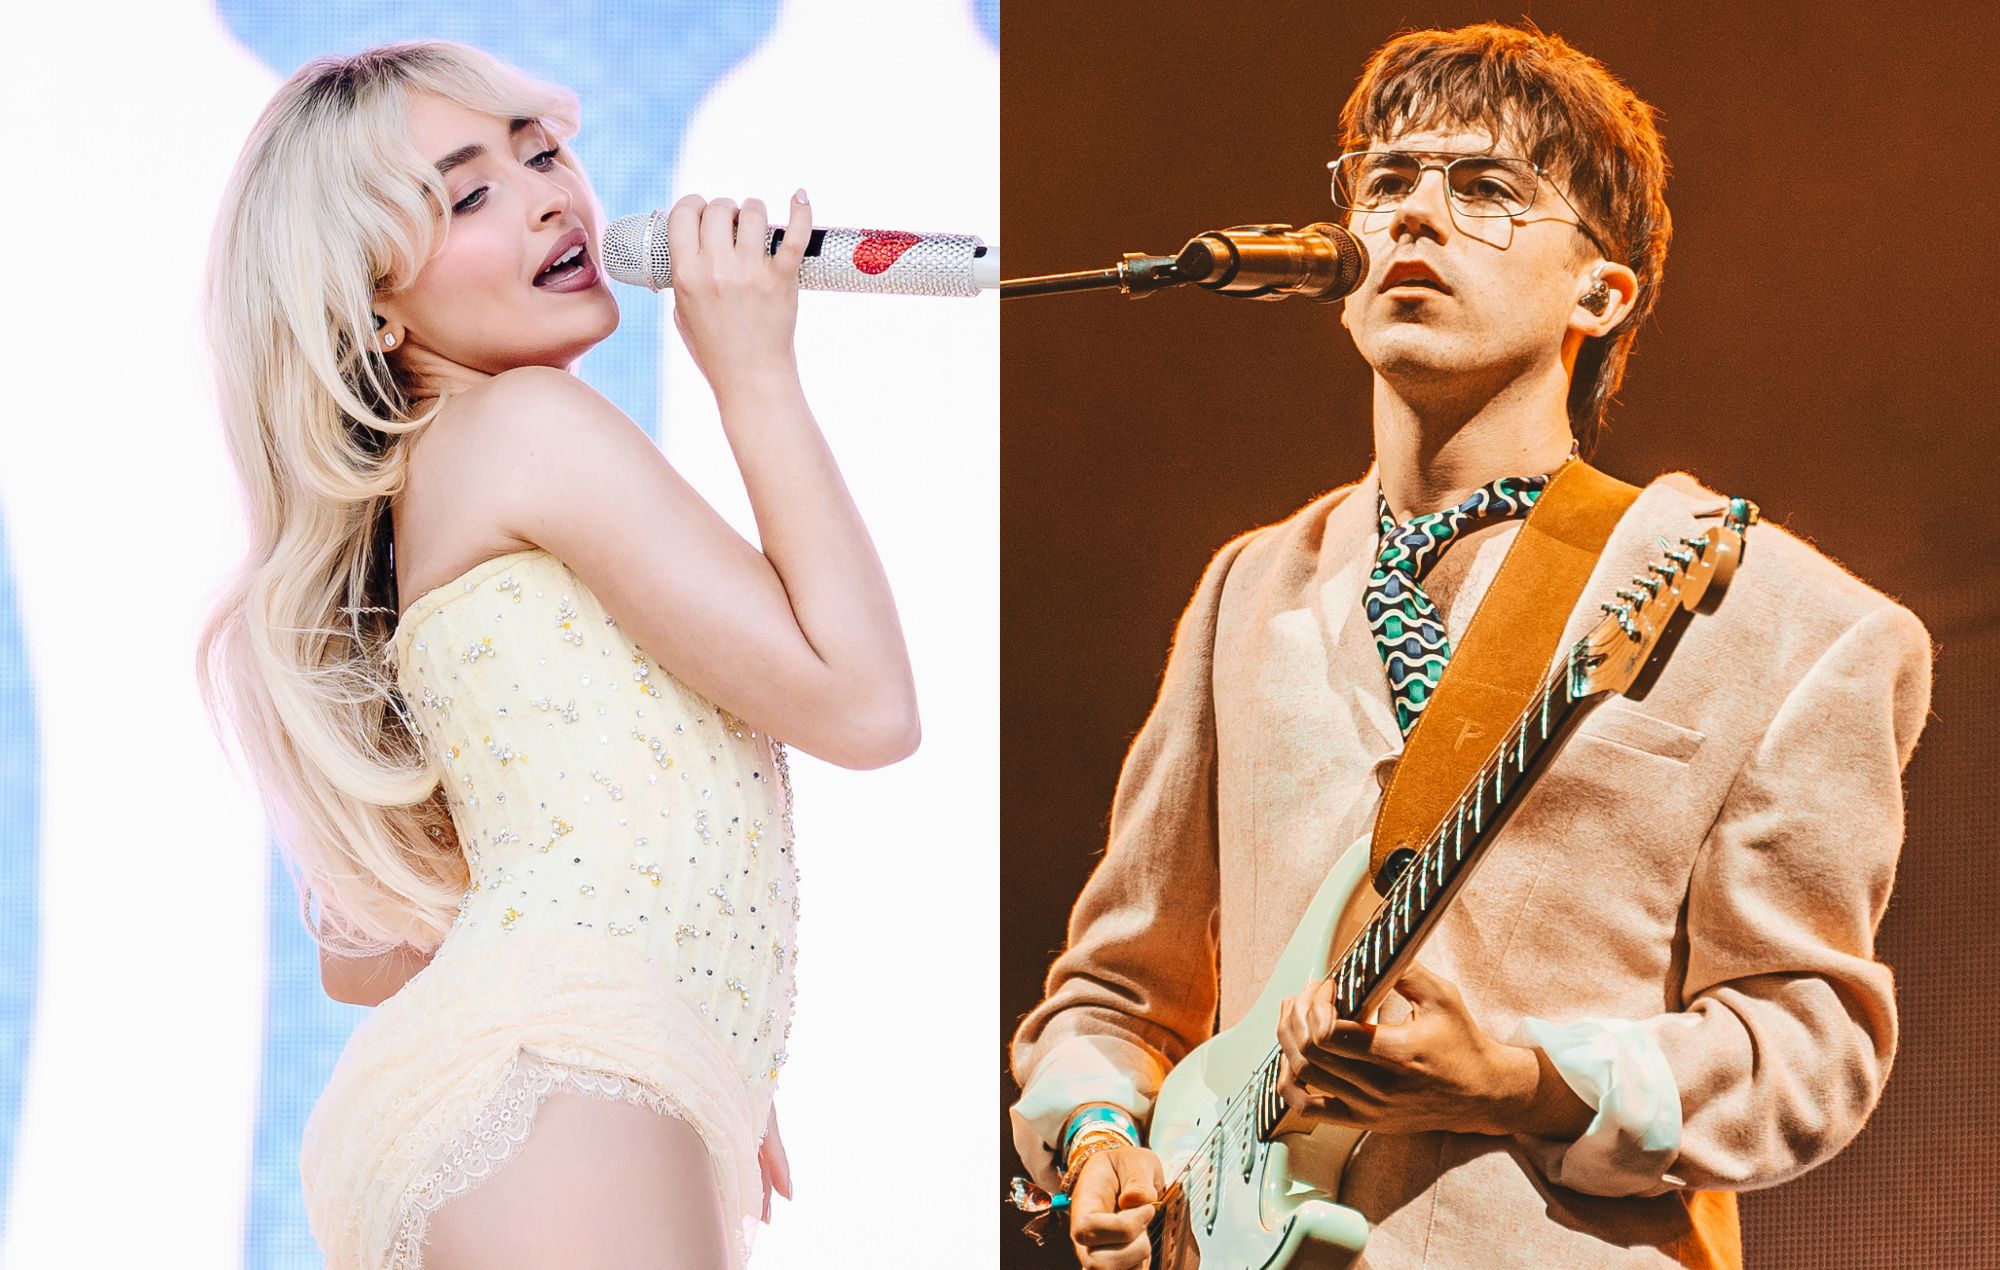 Declan McKenna at Glastonbury on touring with Sabrina Carpenter: “It could wind up being something special”